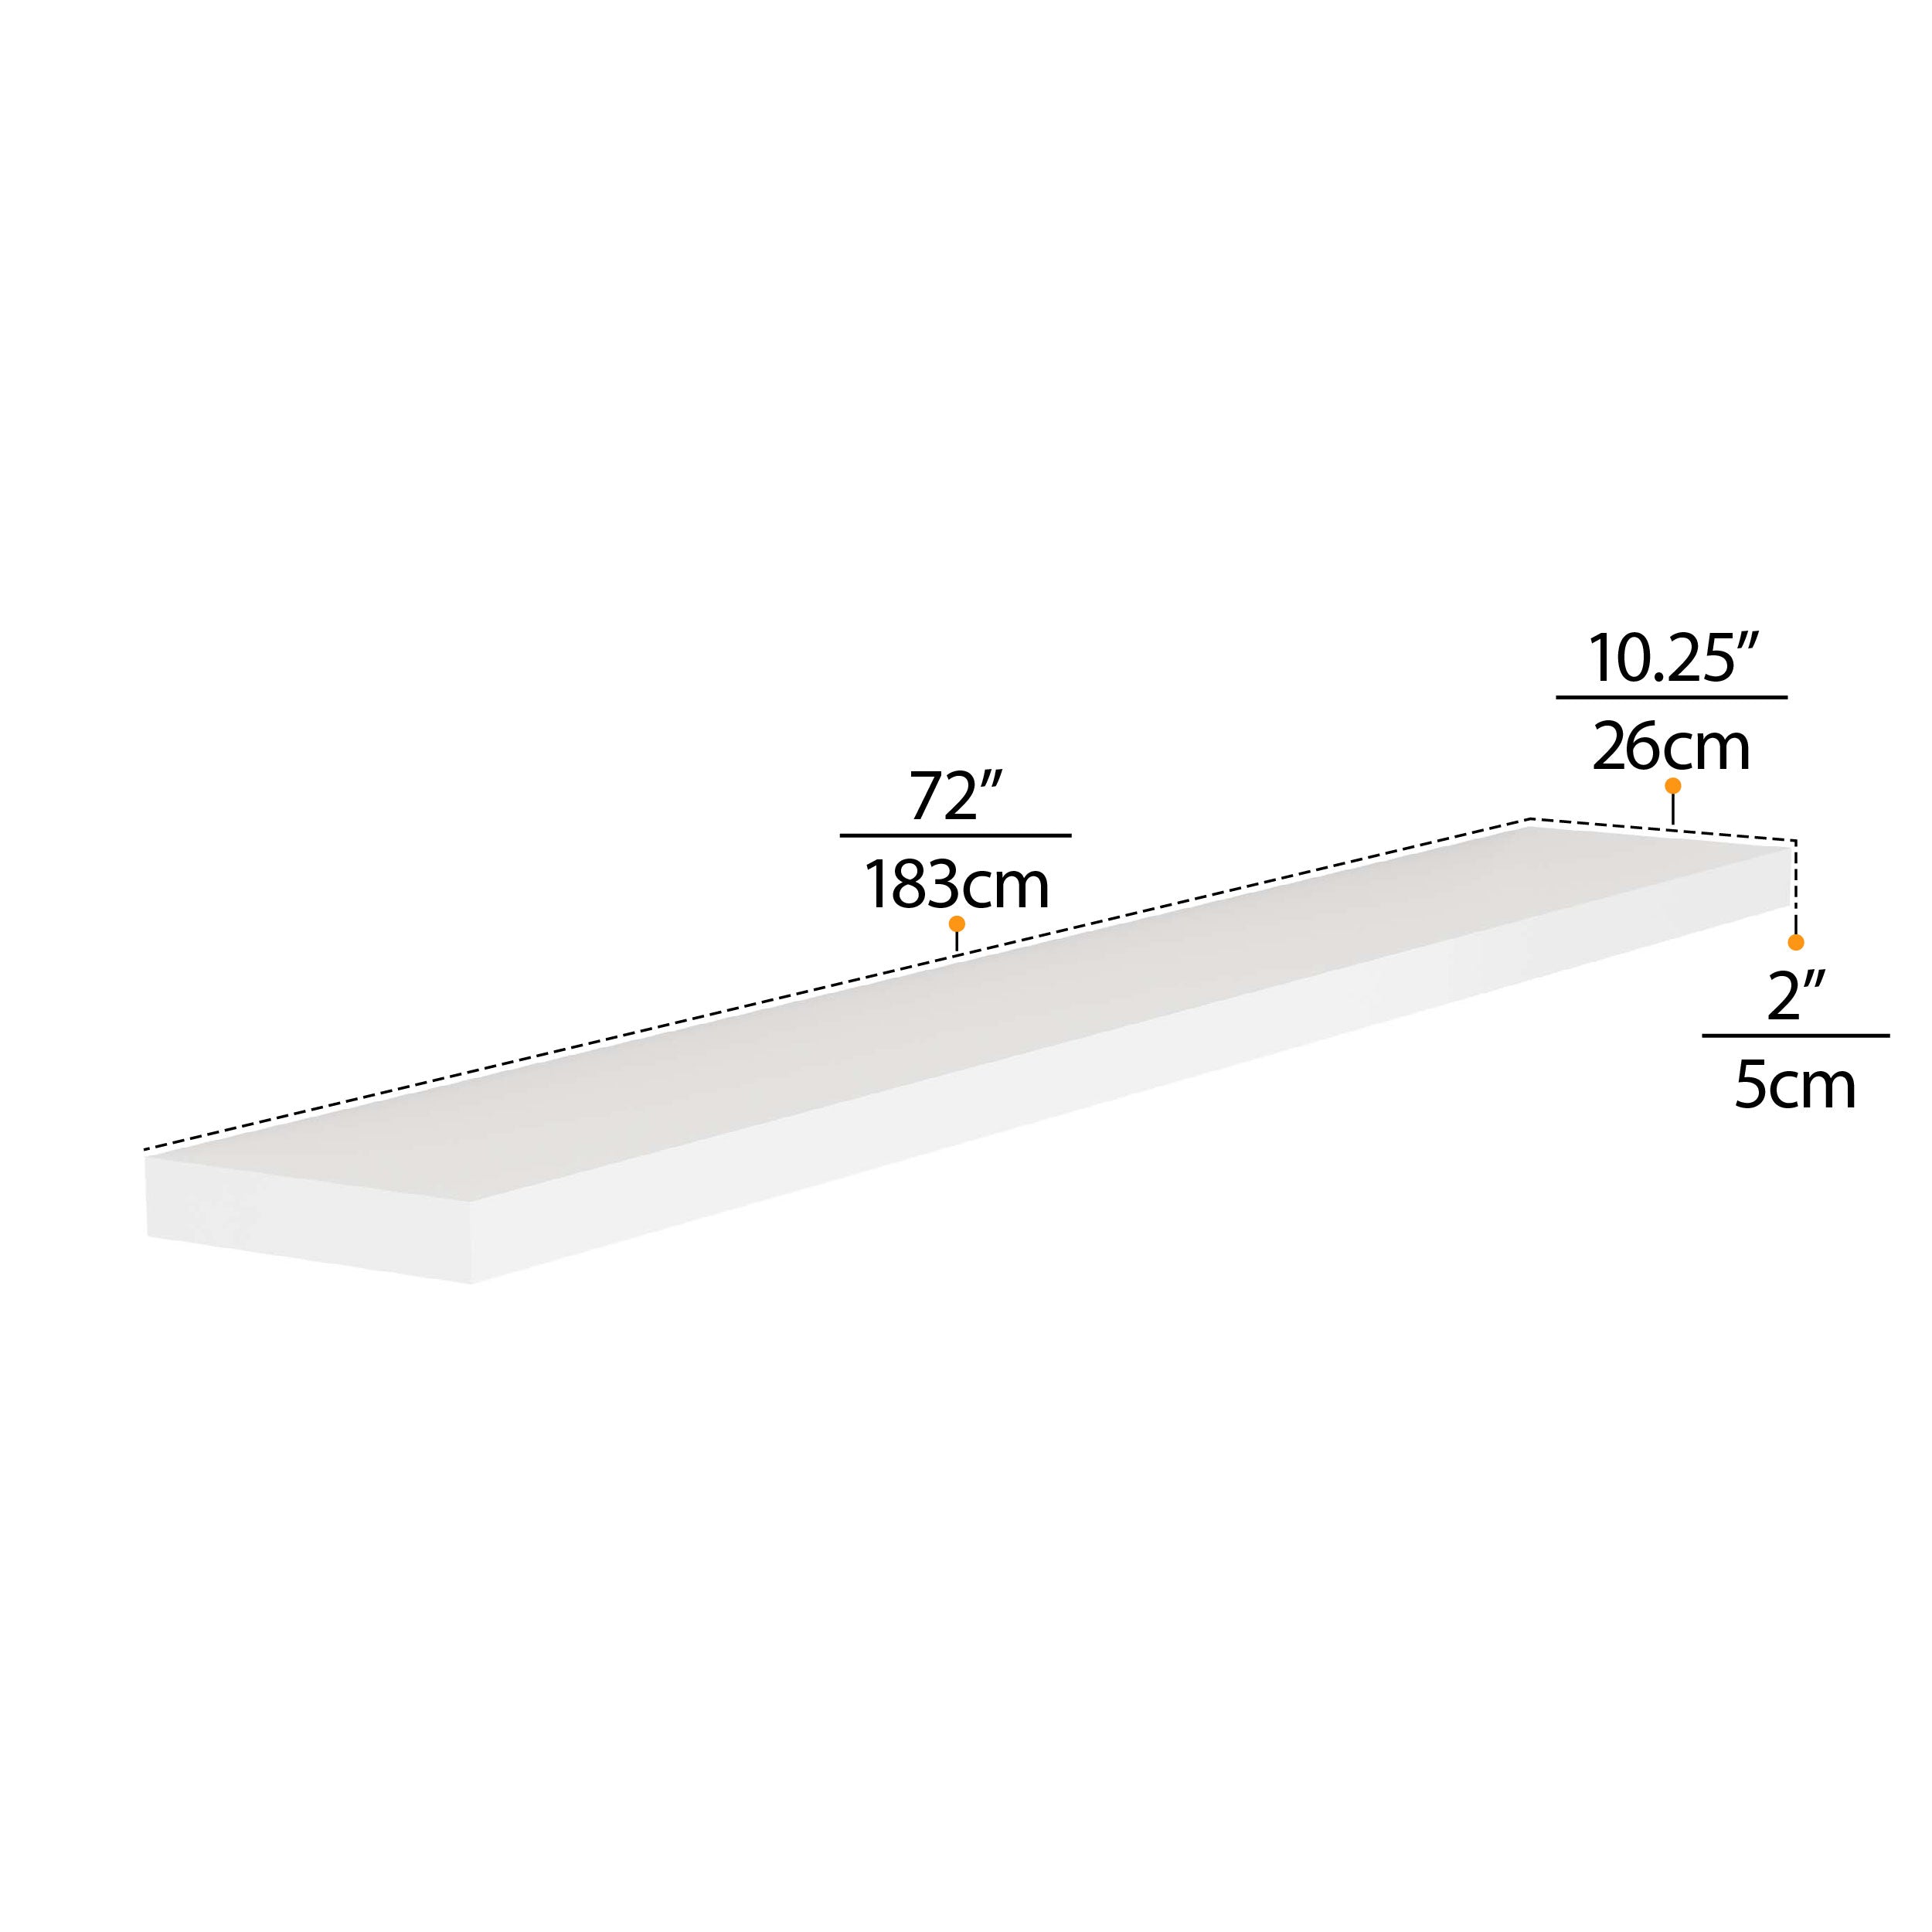 Long floating shelf white diagram, 72 inches by 10.25 inches, shows thickness of 2 inches.